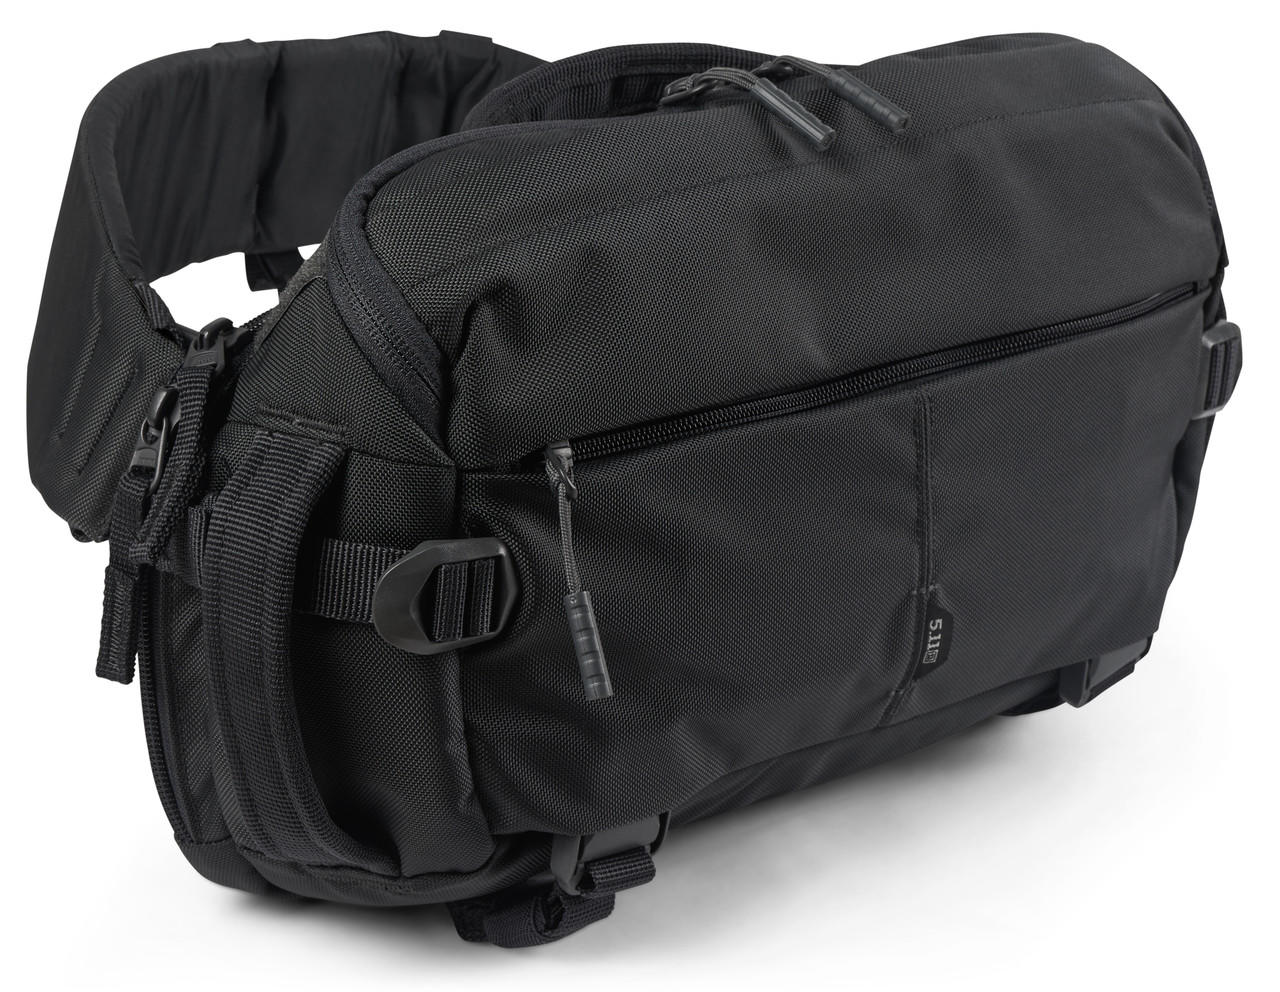 5.11 Tactical on X: New this season, the LV8 Sling Pack is a